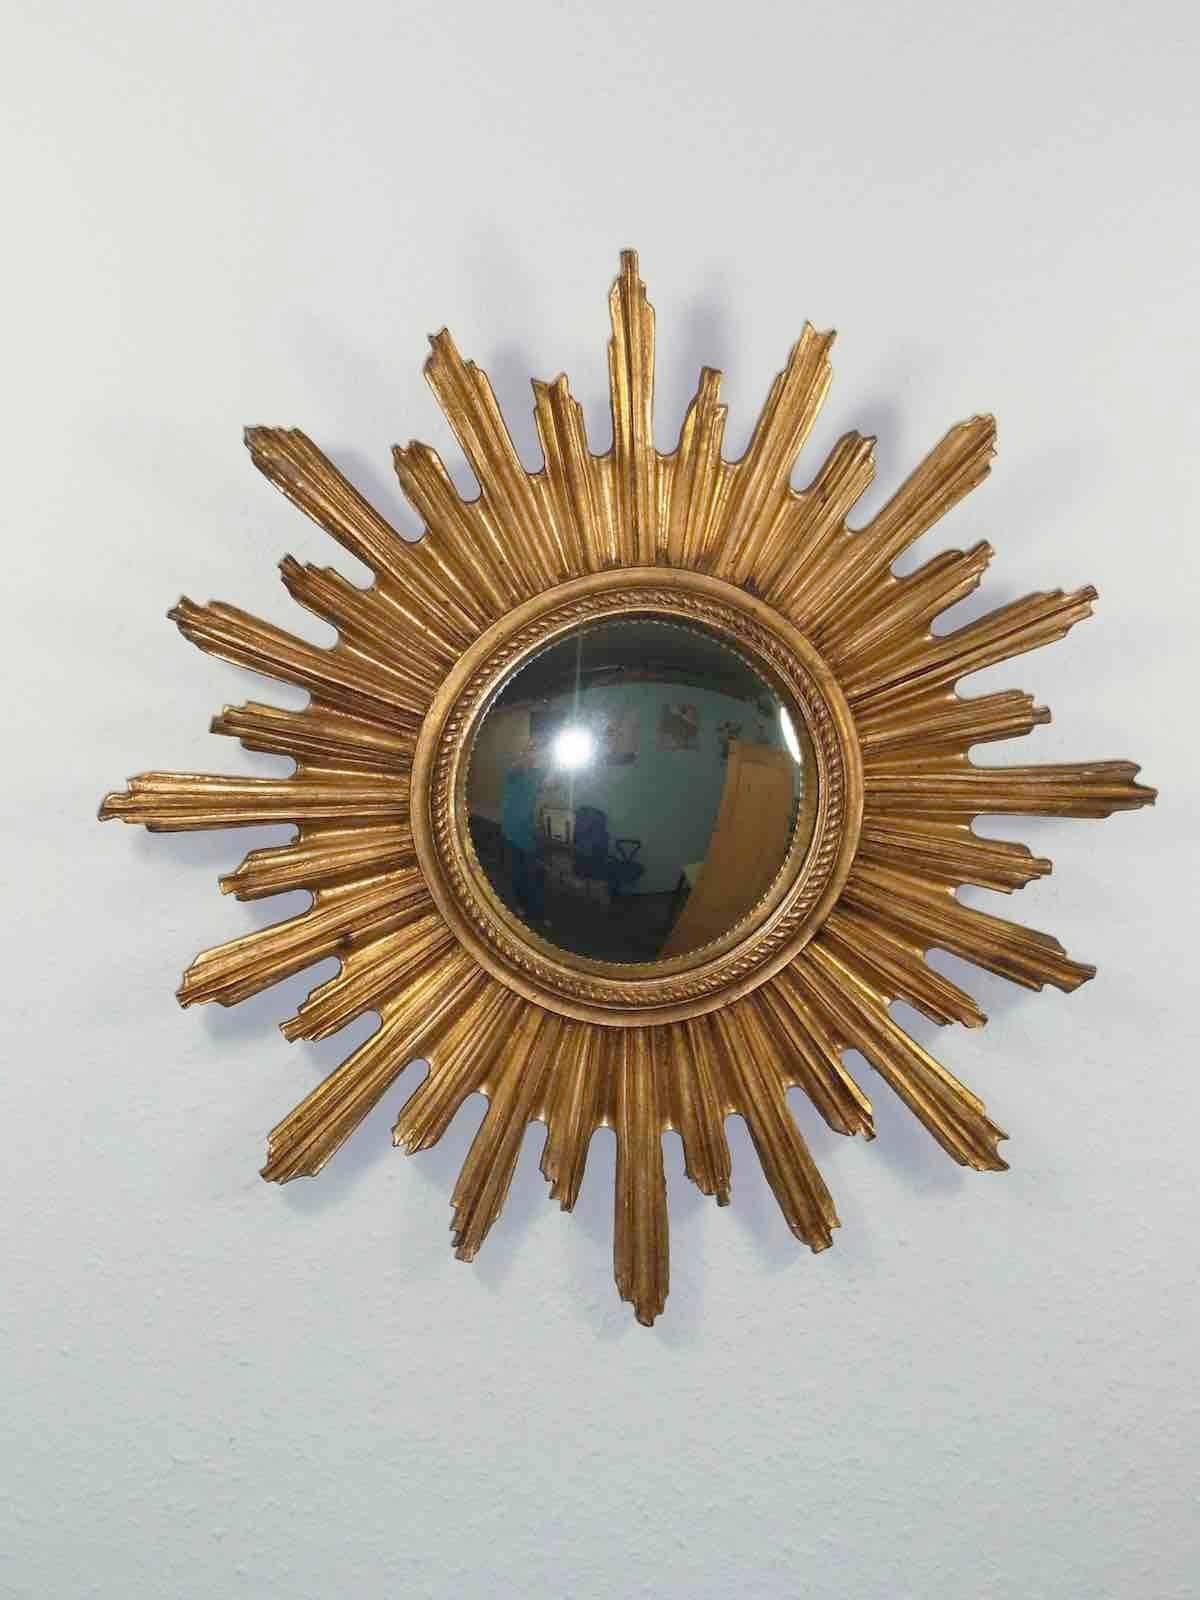 Gorgeous starburst mirror. 
Made of gilded Resin.
No chips, no cracks, no repairs.
It measures approximate 21 1/4"; in diameter,
Mirror only is approximate 7 1/4"; in diameter.
It stands approximate 1 3/4"; from the wall to the